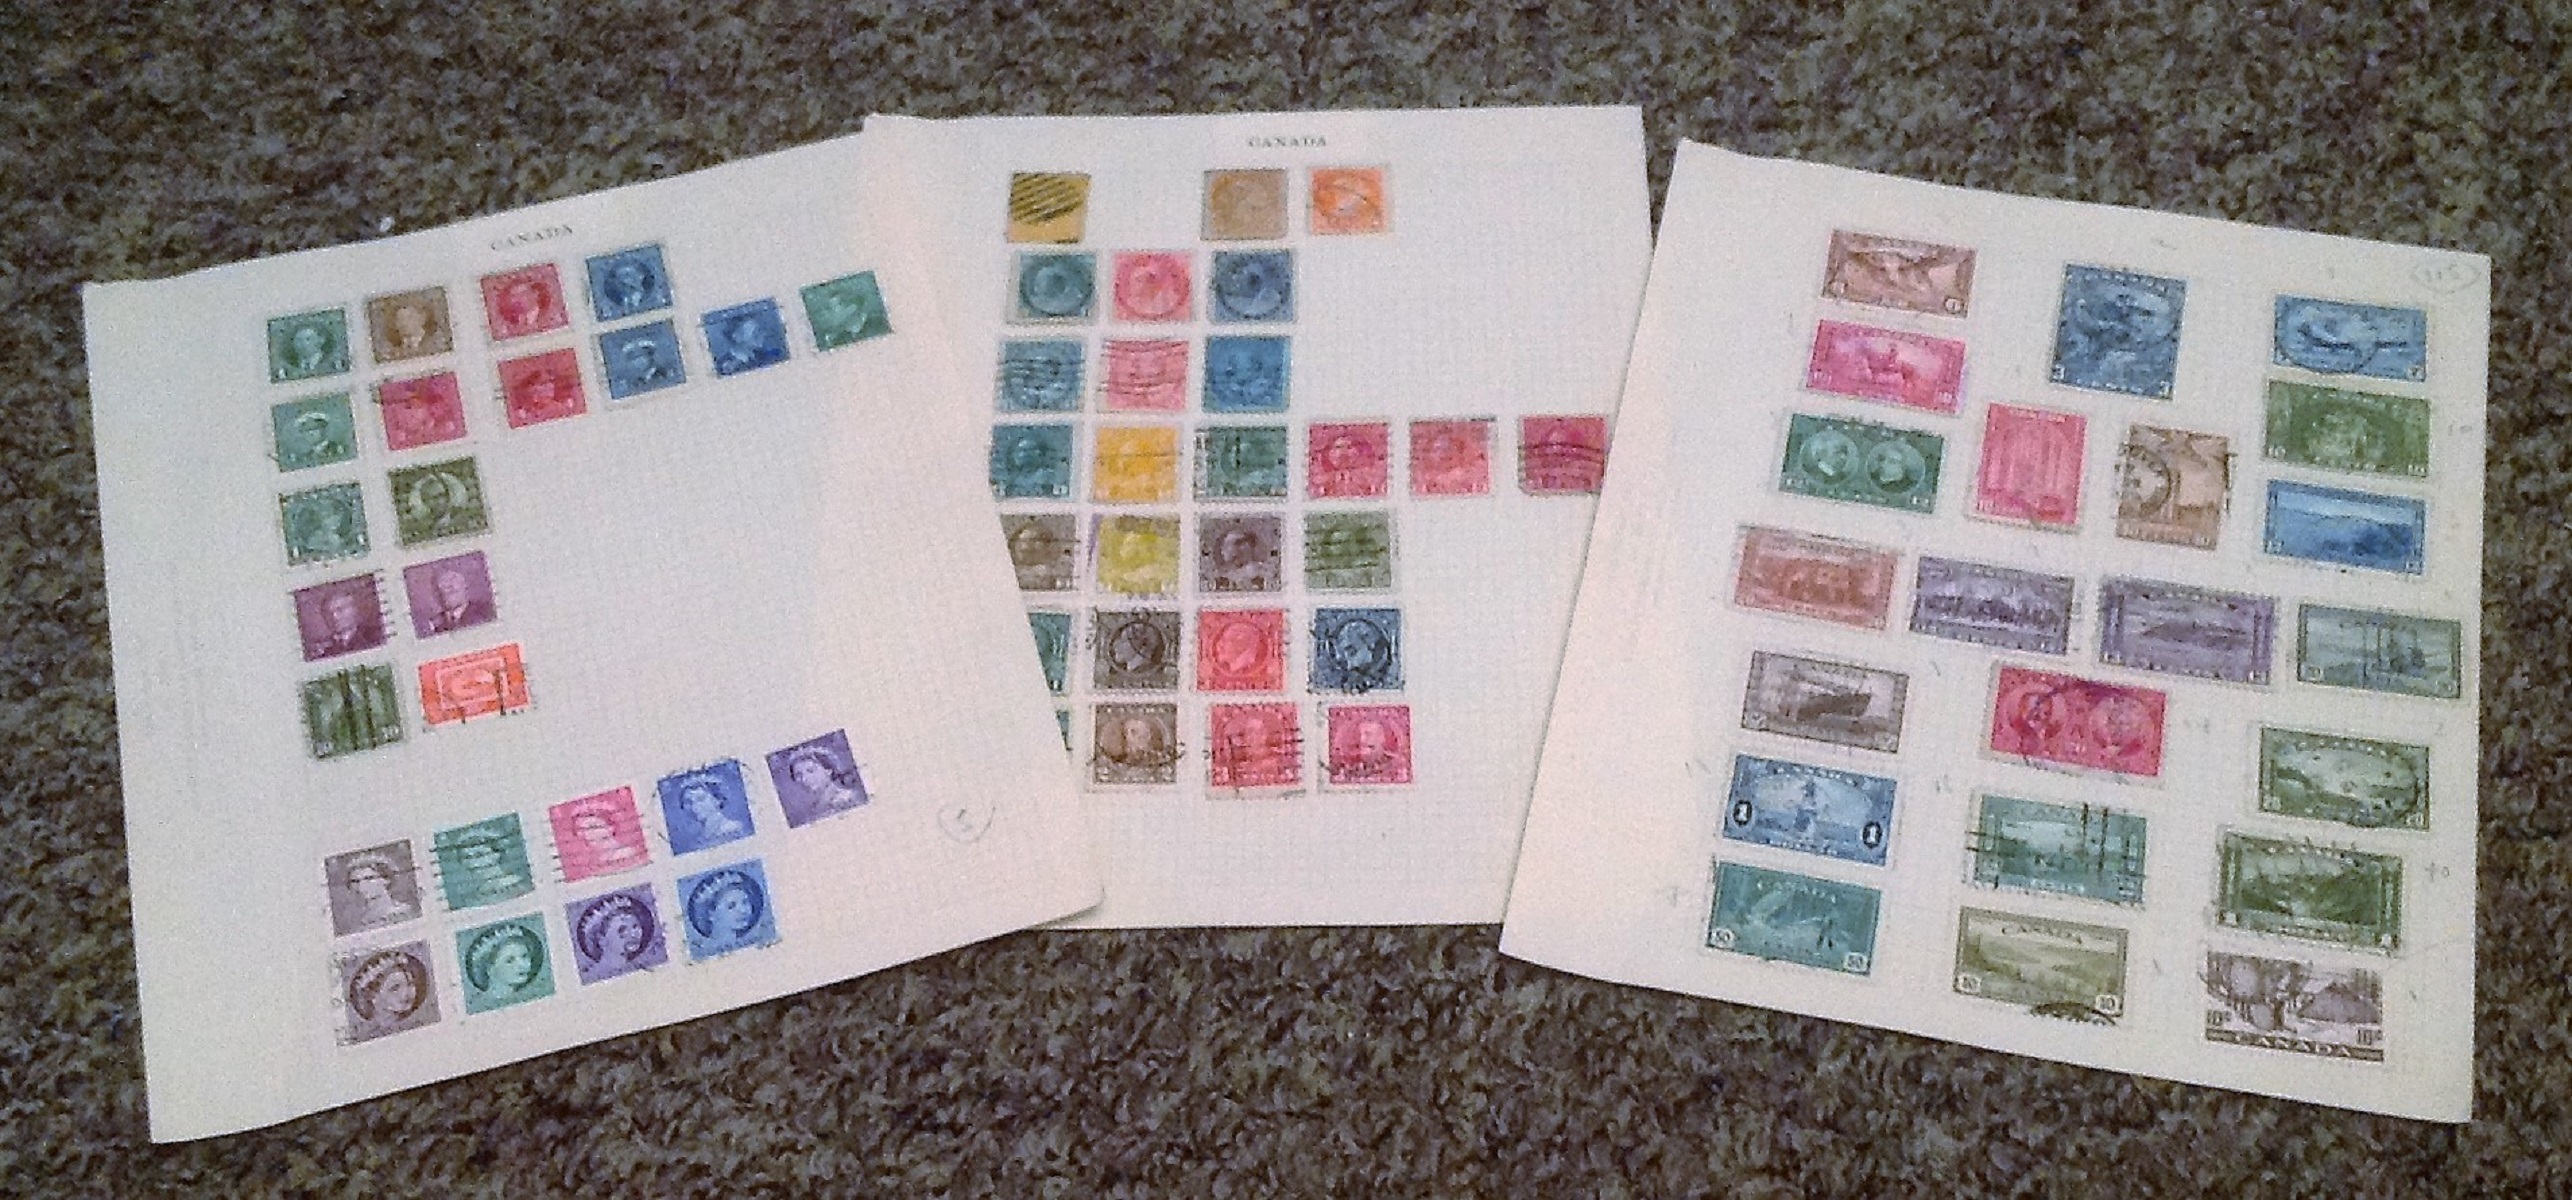 Canada stamps 3 loose album pages dating from Queen Victoria to George VI catalogue value approx £